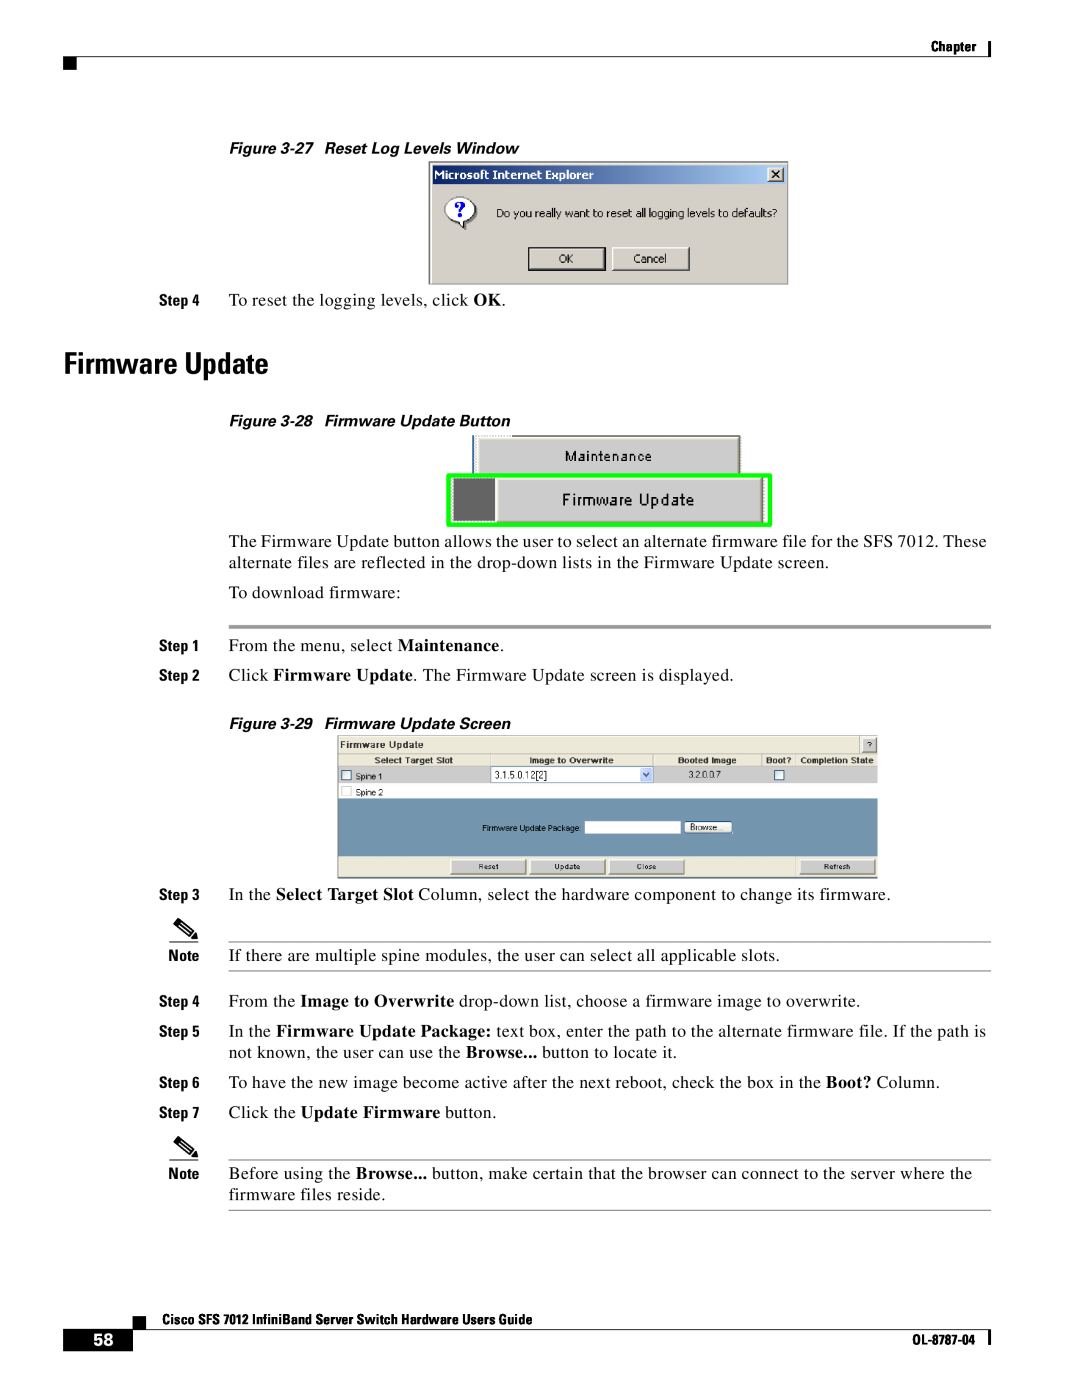 Cisco Systems SFS 7012 manual Firmware Update 